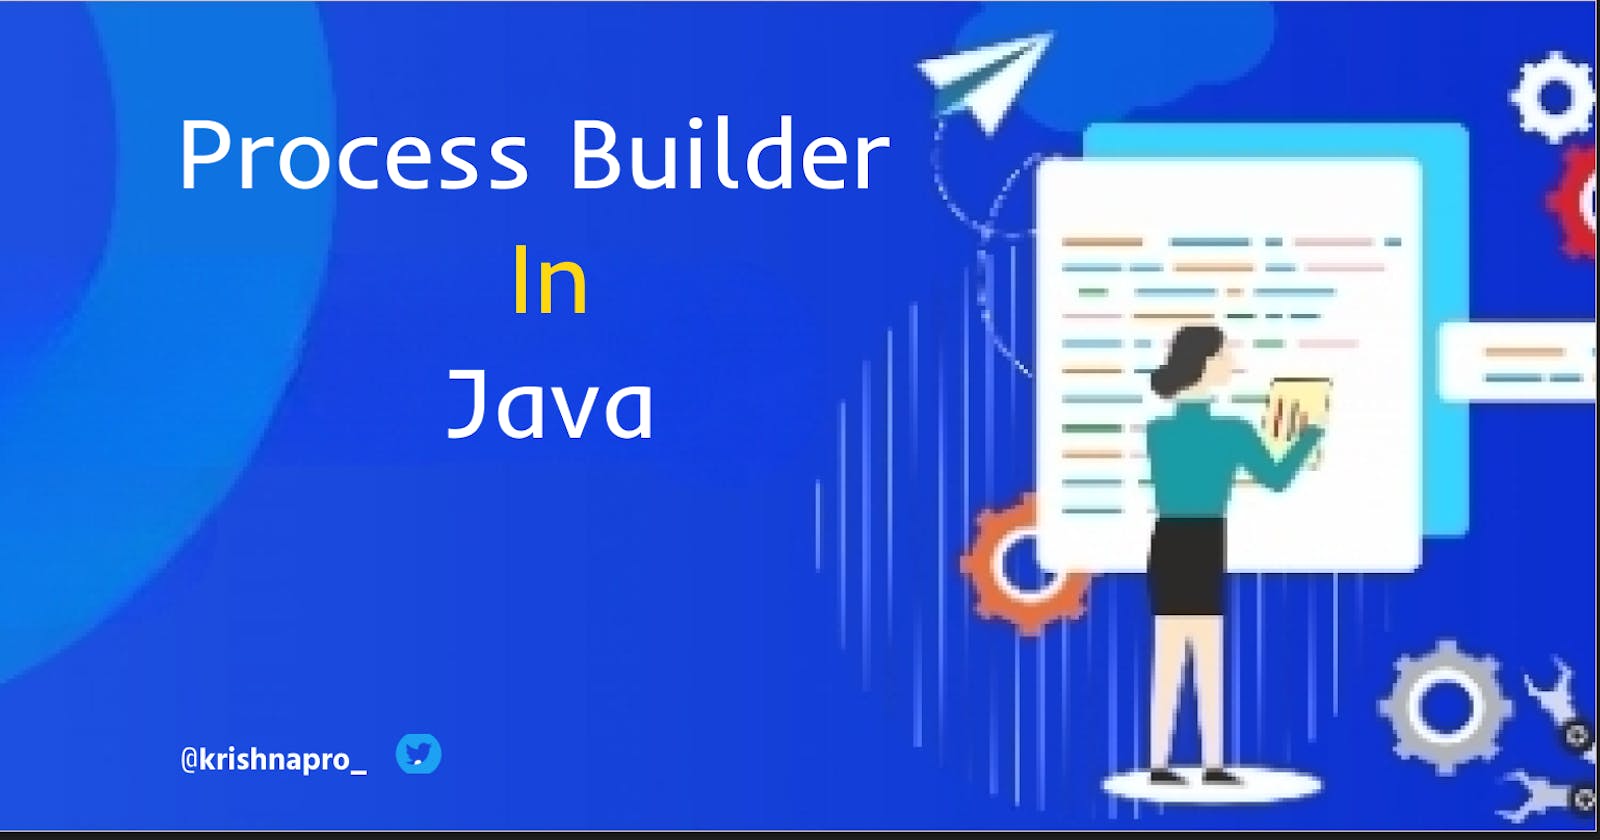 A Beginner's Guide to ProcessBuilder in Java